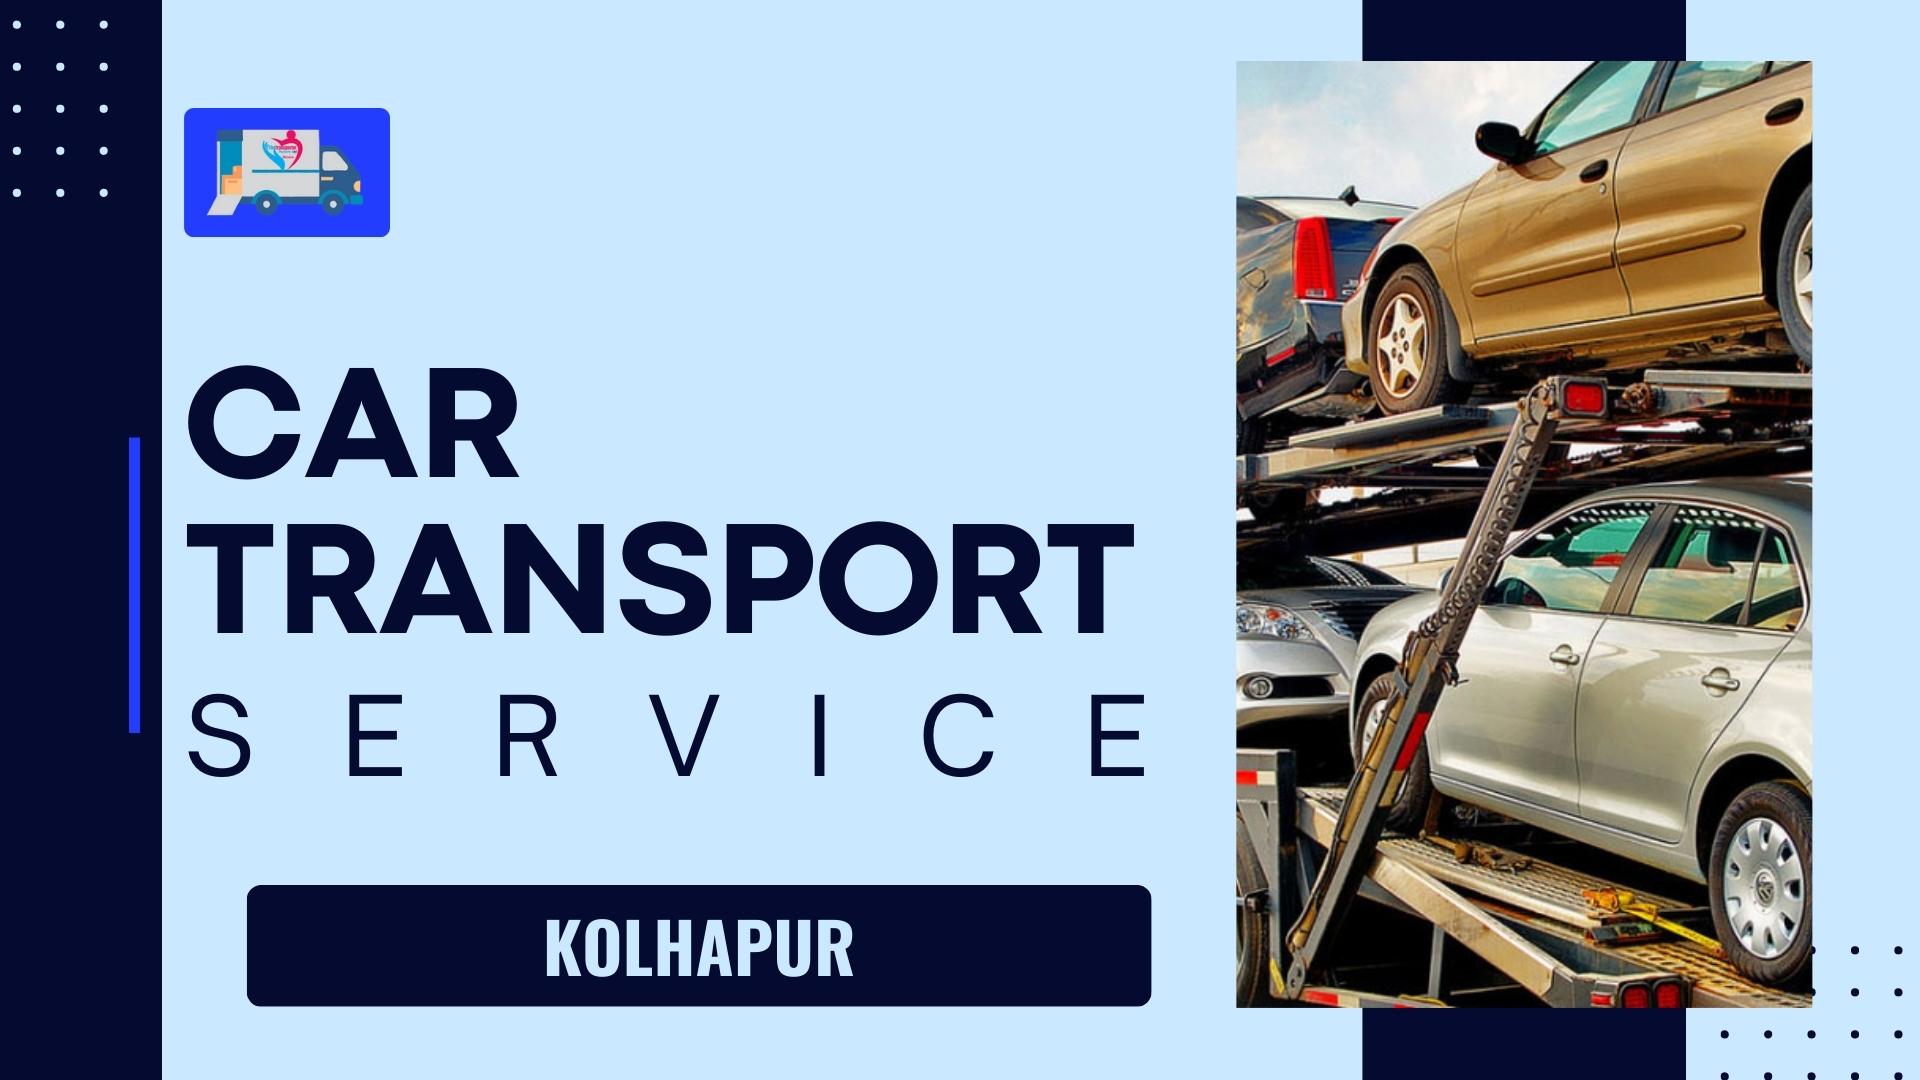 Quality car Carrier Service in Kolhapur